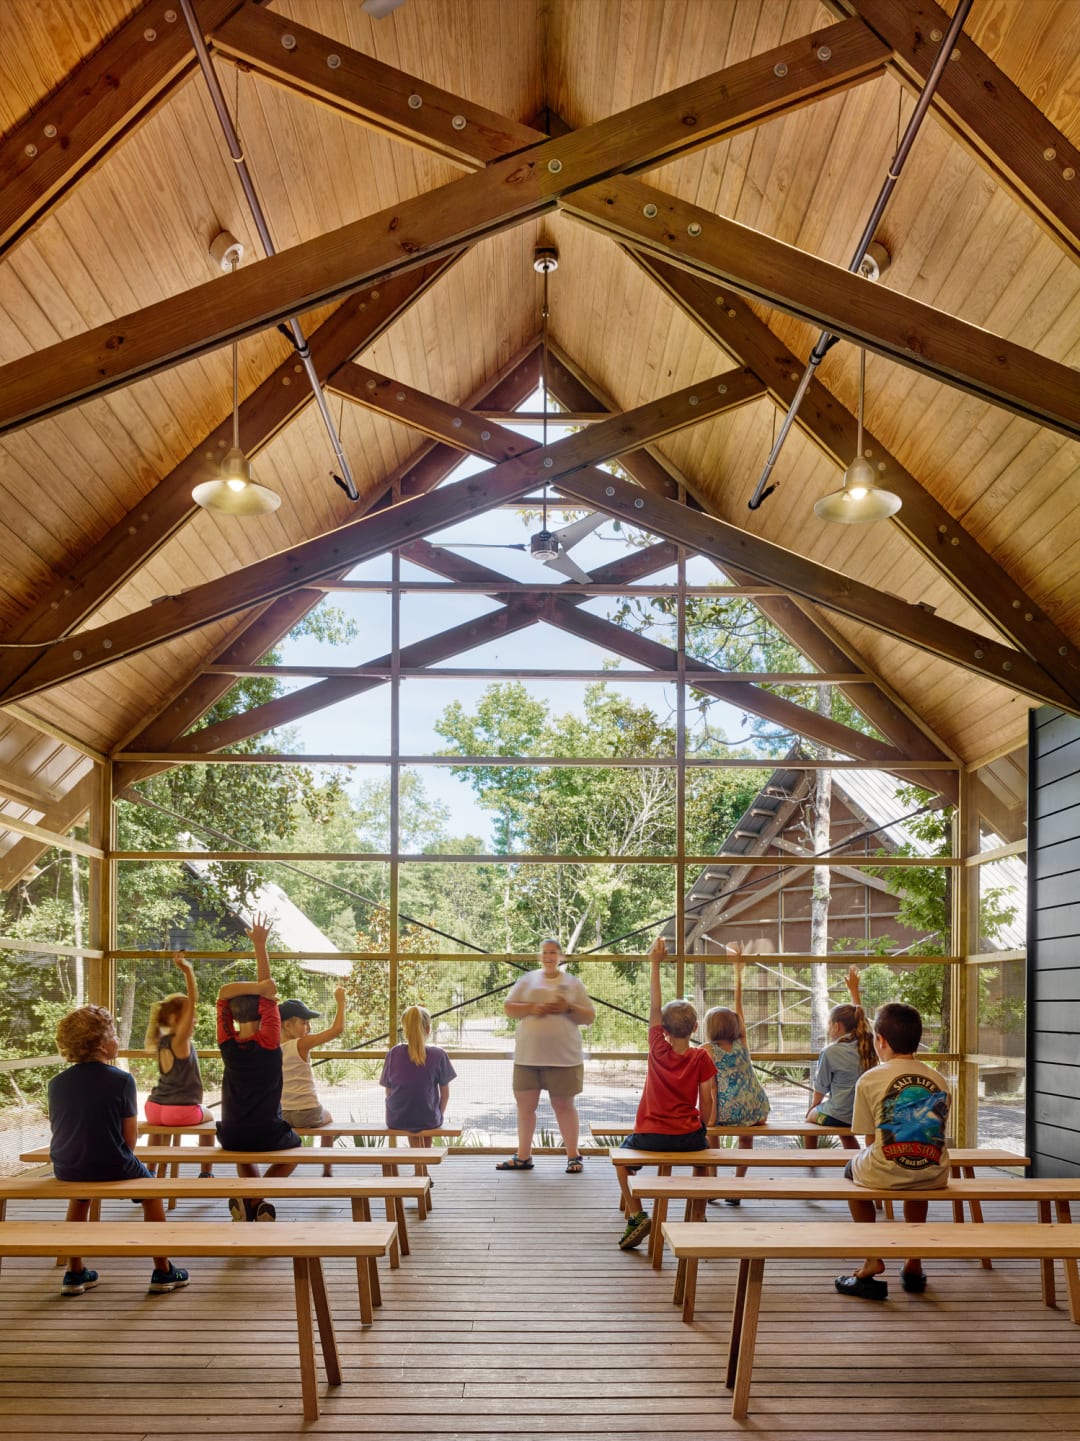 MARINE EDUCATION CENTER AT THE GULF COAST RESEARCH LABORATORY IN OCEAN SPRINGS, MISS. BY LAKE|FLATO ARCHITECTS IN COLLABORATION WITH UNABRIDGED ARCHITECTURE, A 2020 COTE TOP TEN AWARD RECIPIENT(사진=AIA)